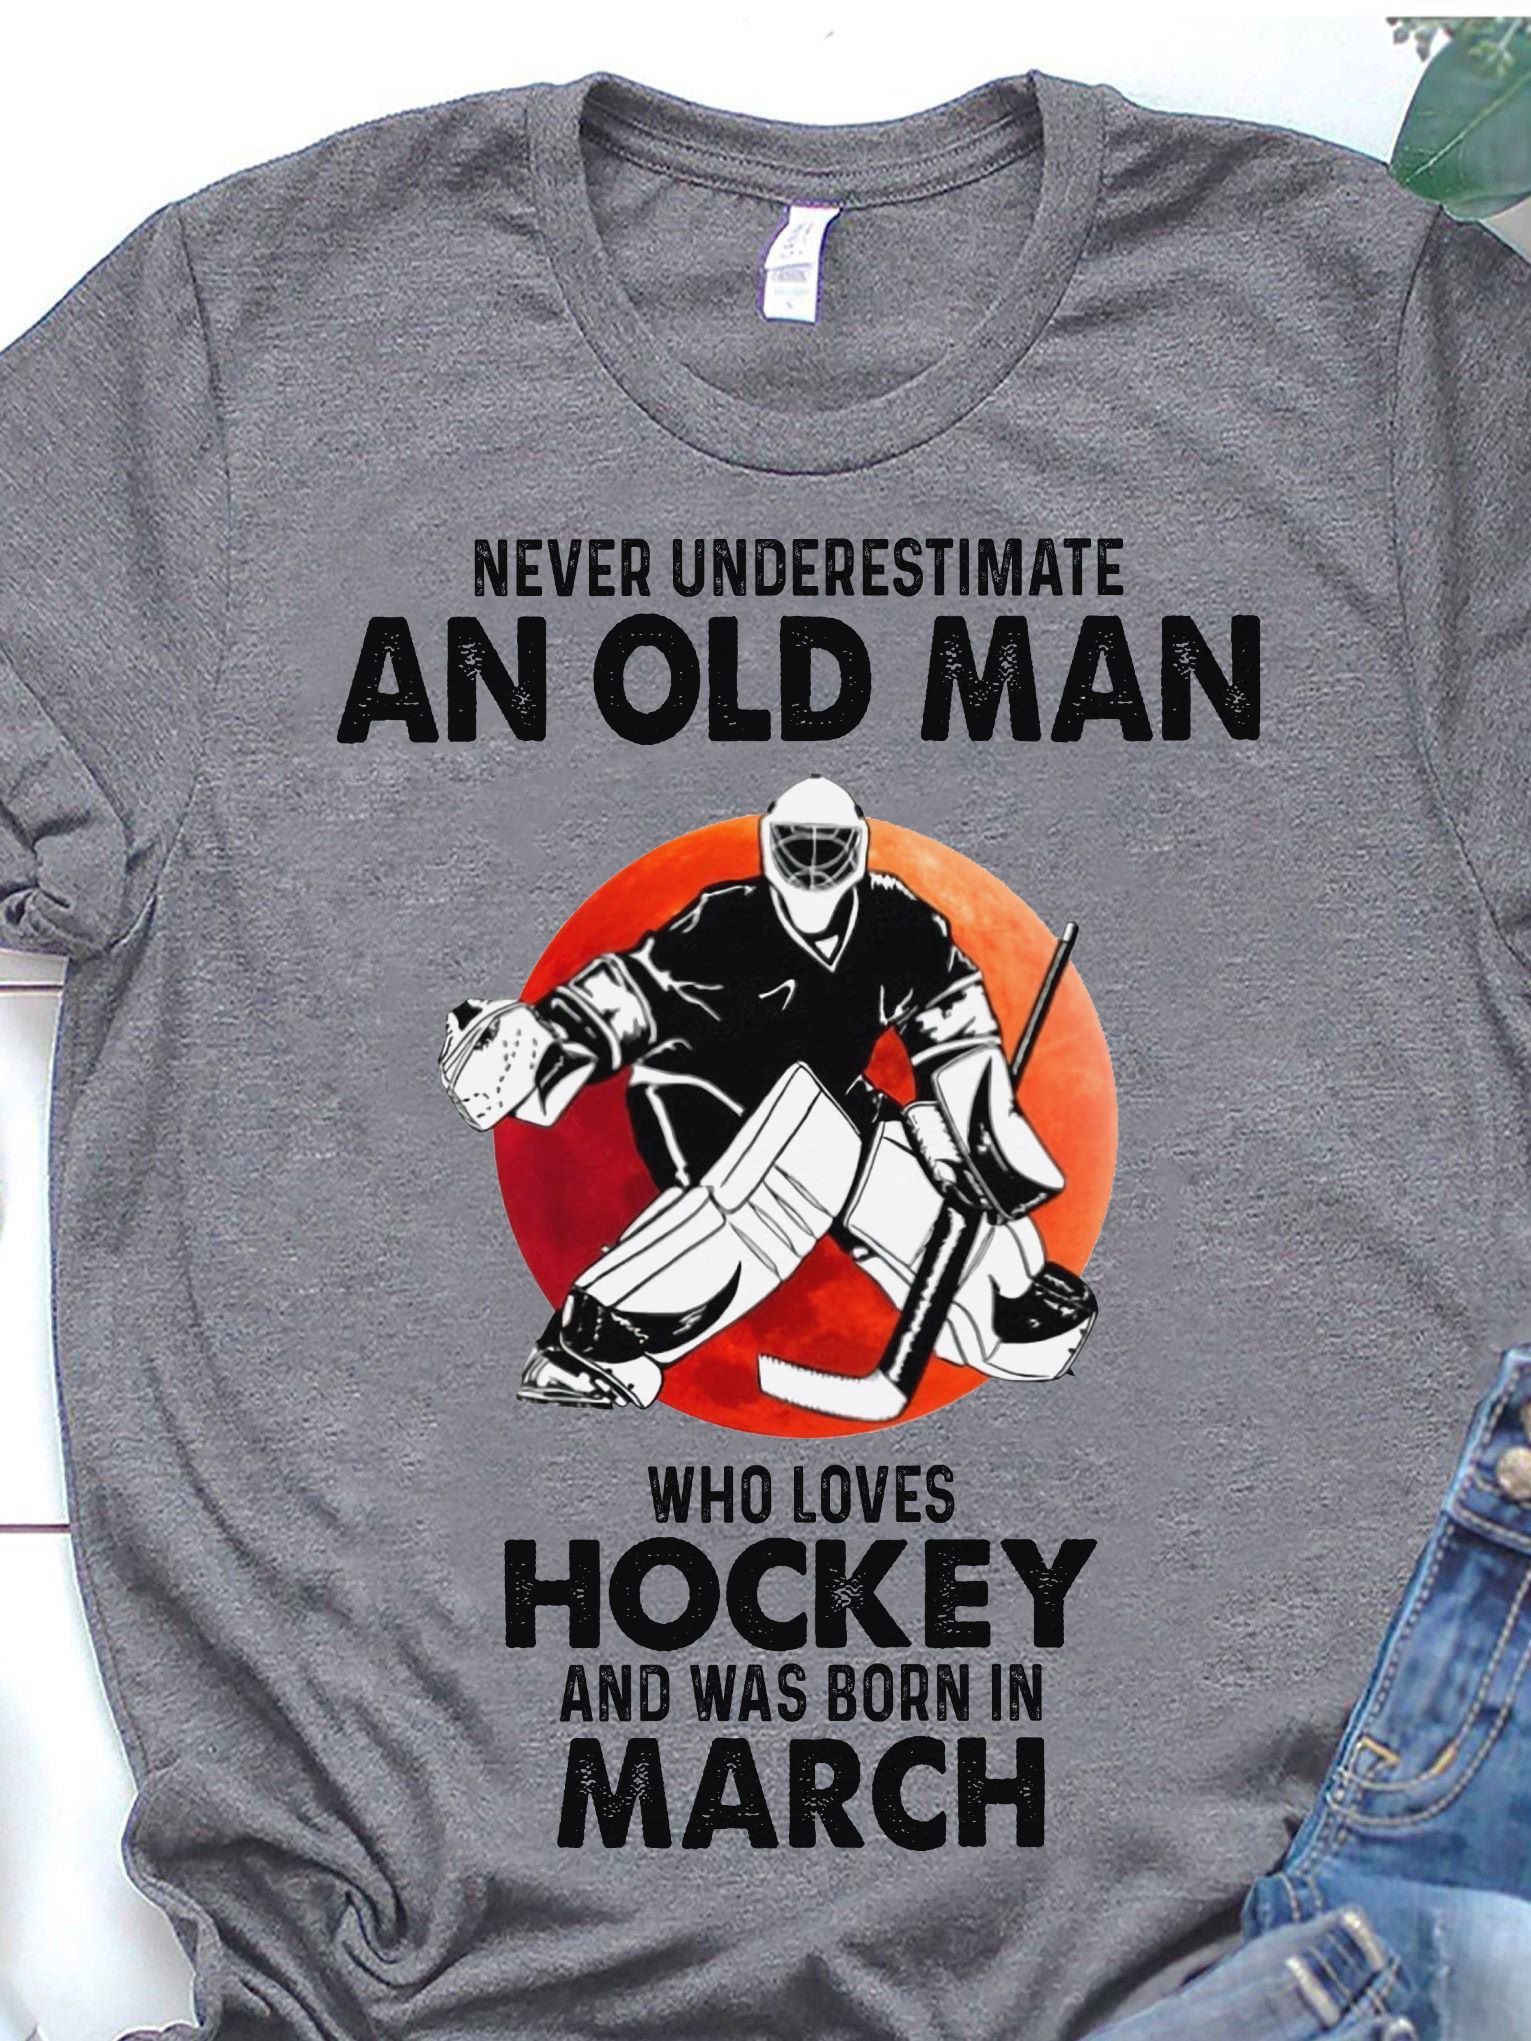 Never underestimate an old man who loves hockey and was born in March